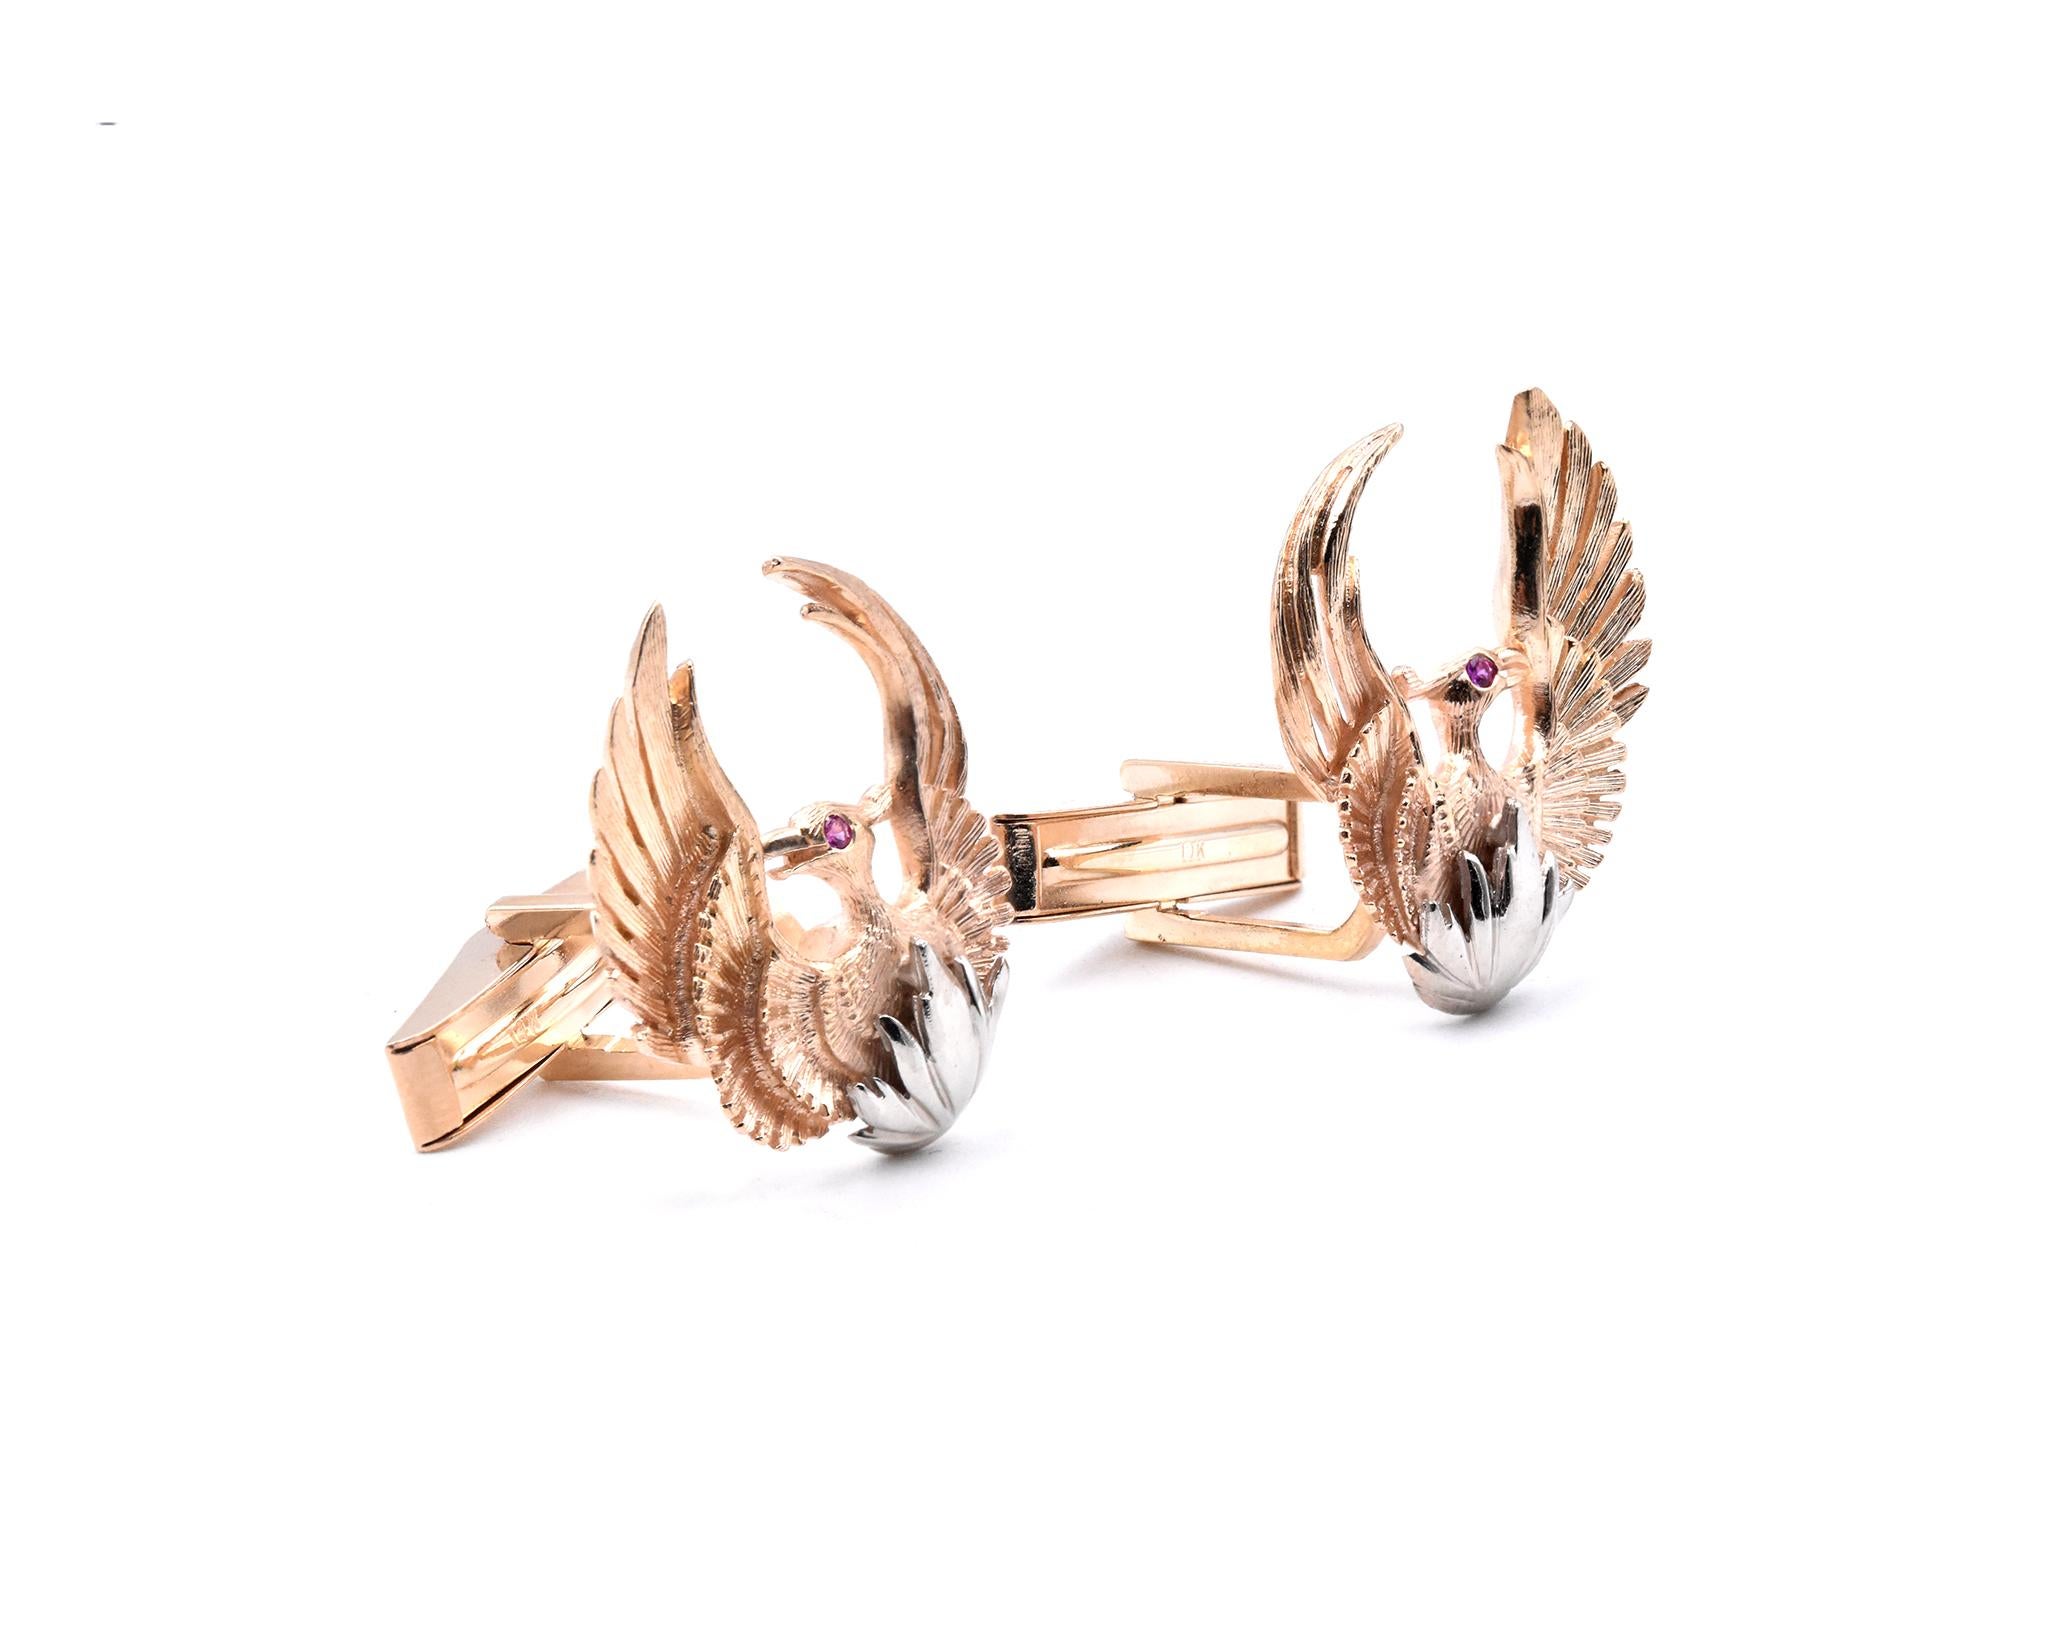 Material: 14k yellow and white gold
Dimensions: cufflinks measure 24.9 X 21mm 
Weight: 13.1 grams
